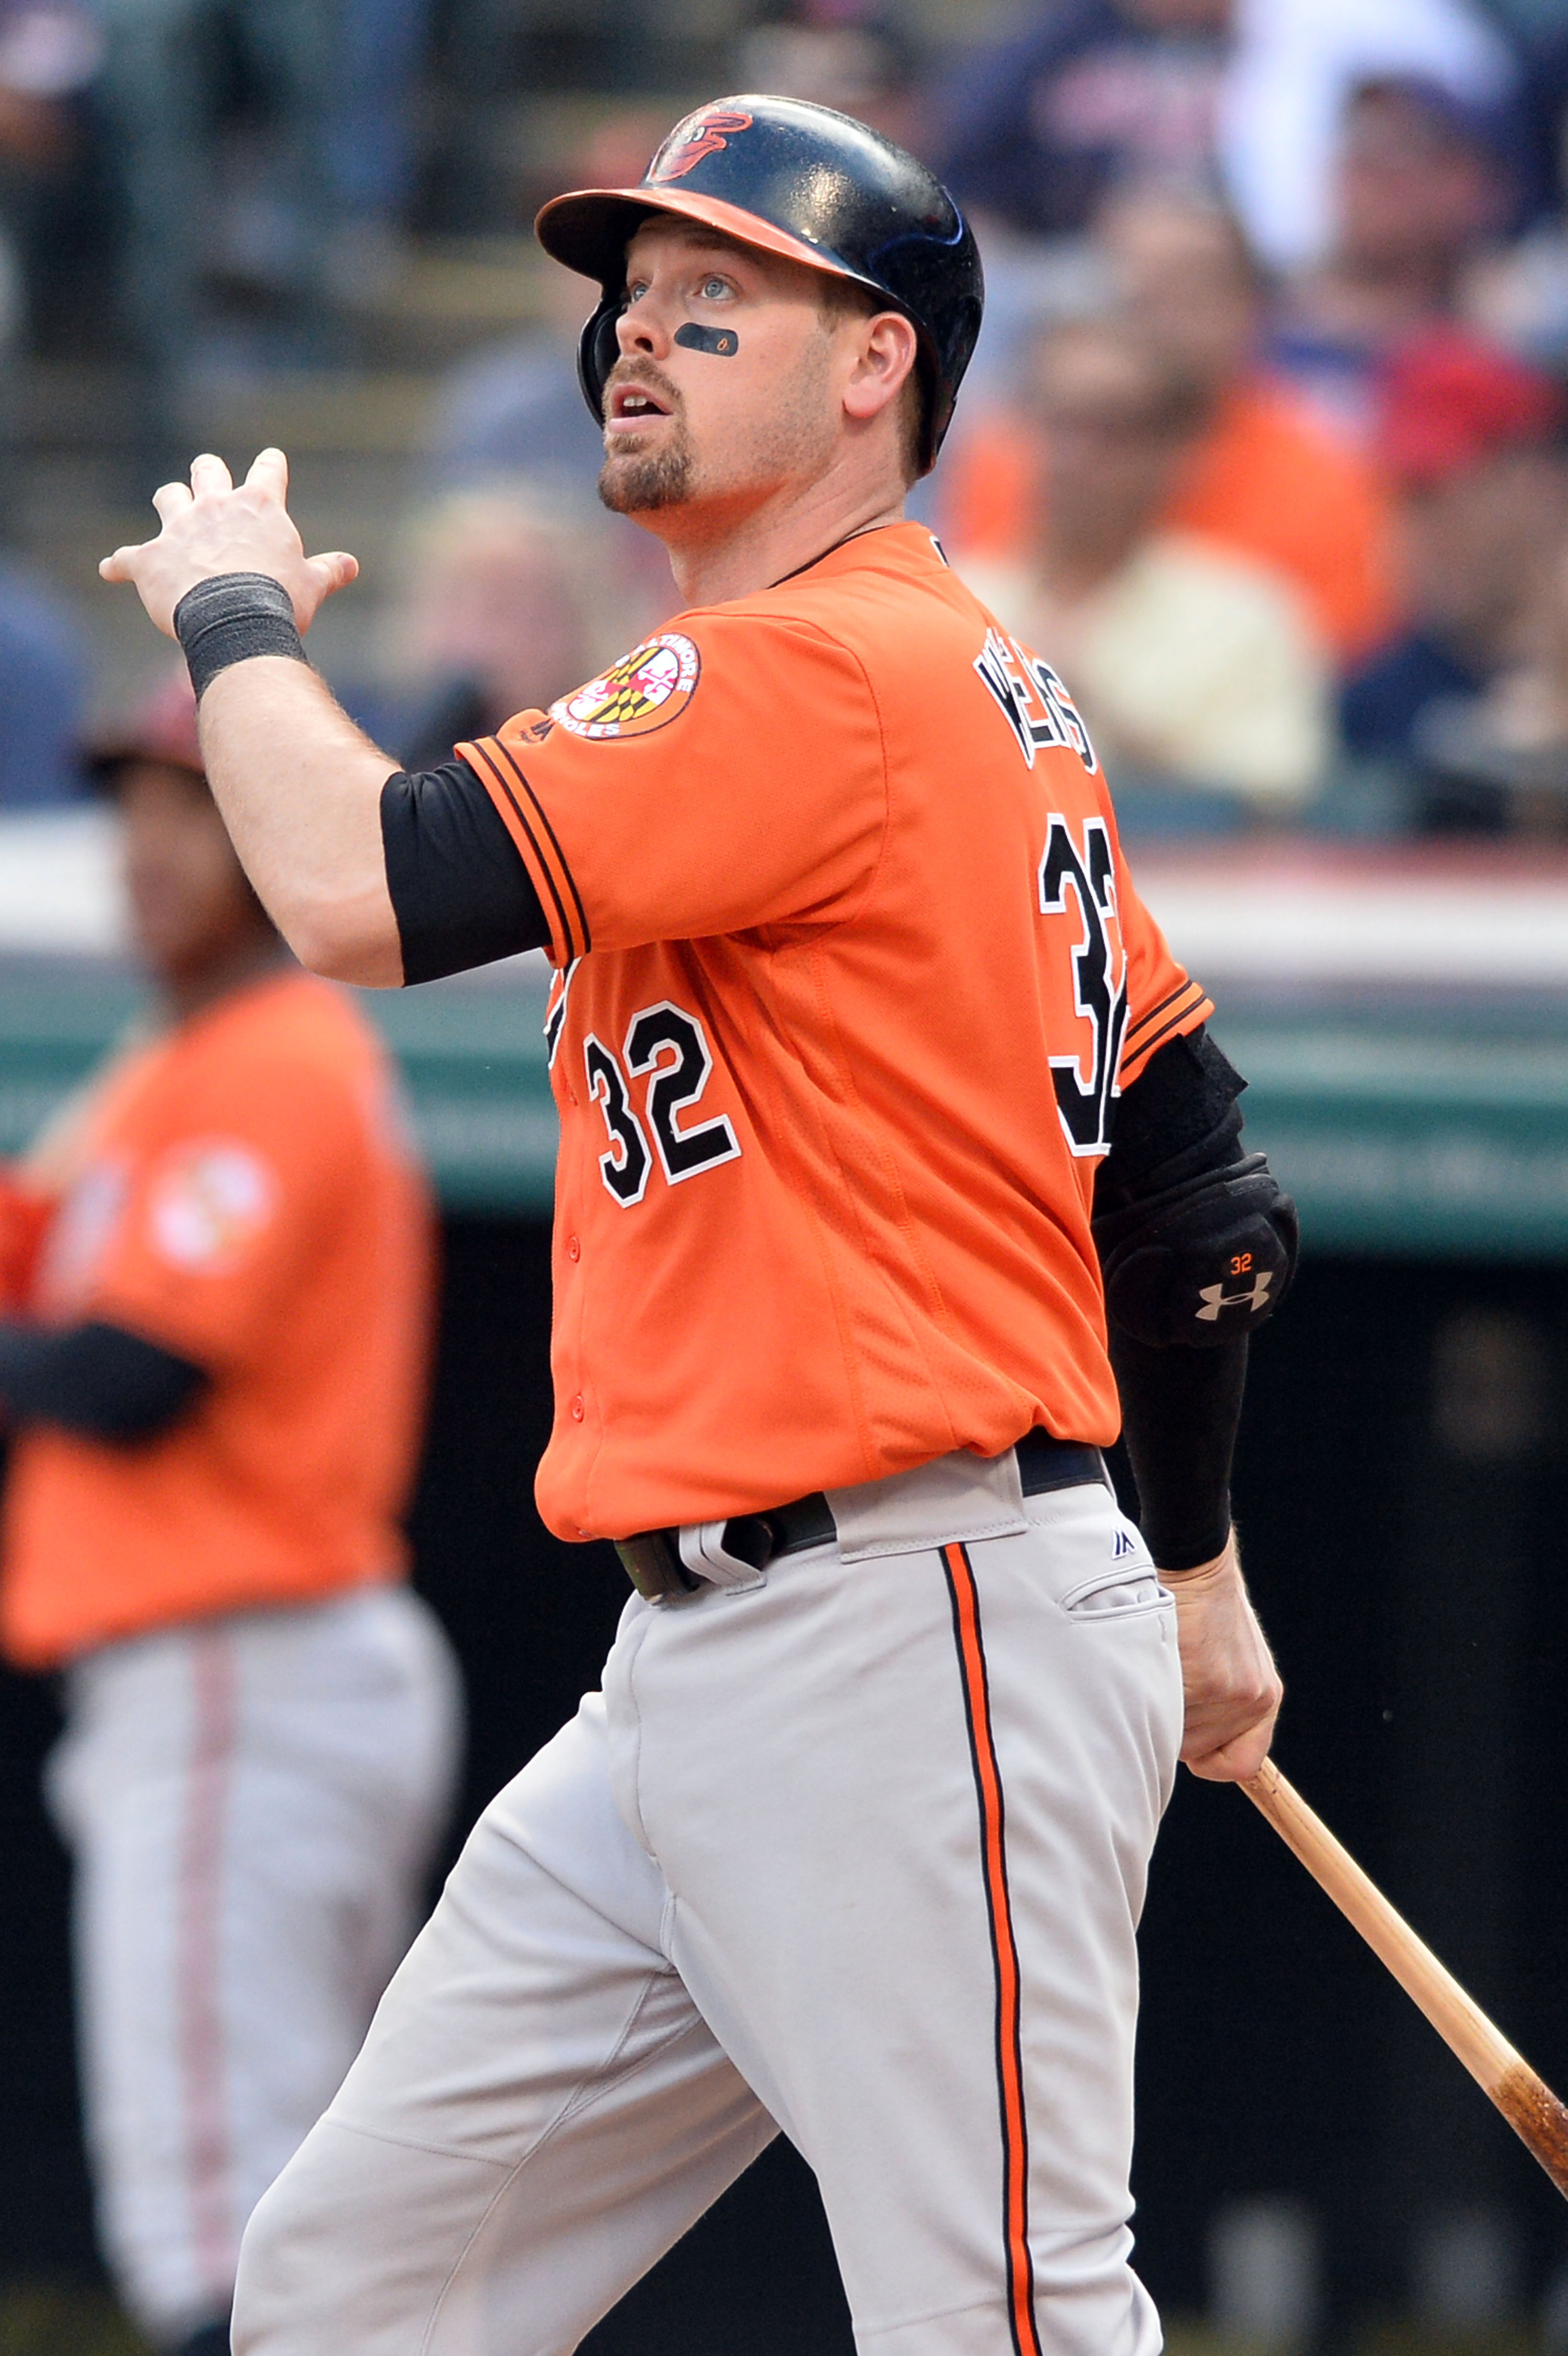 Ready or not, Wieters set to arrive in Baltimore - The San Diego